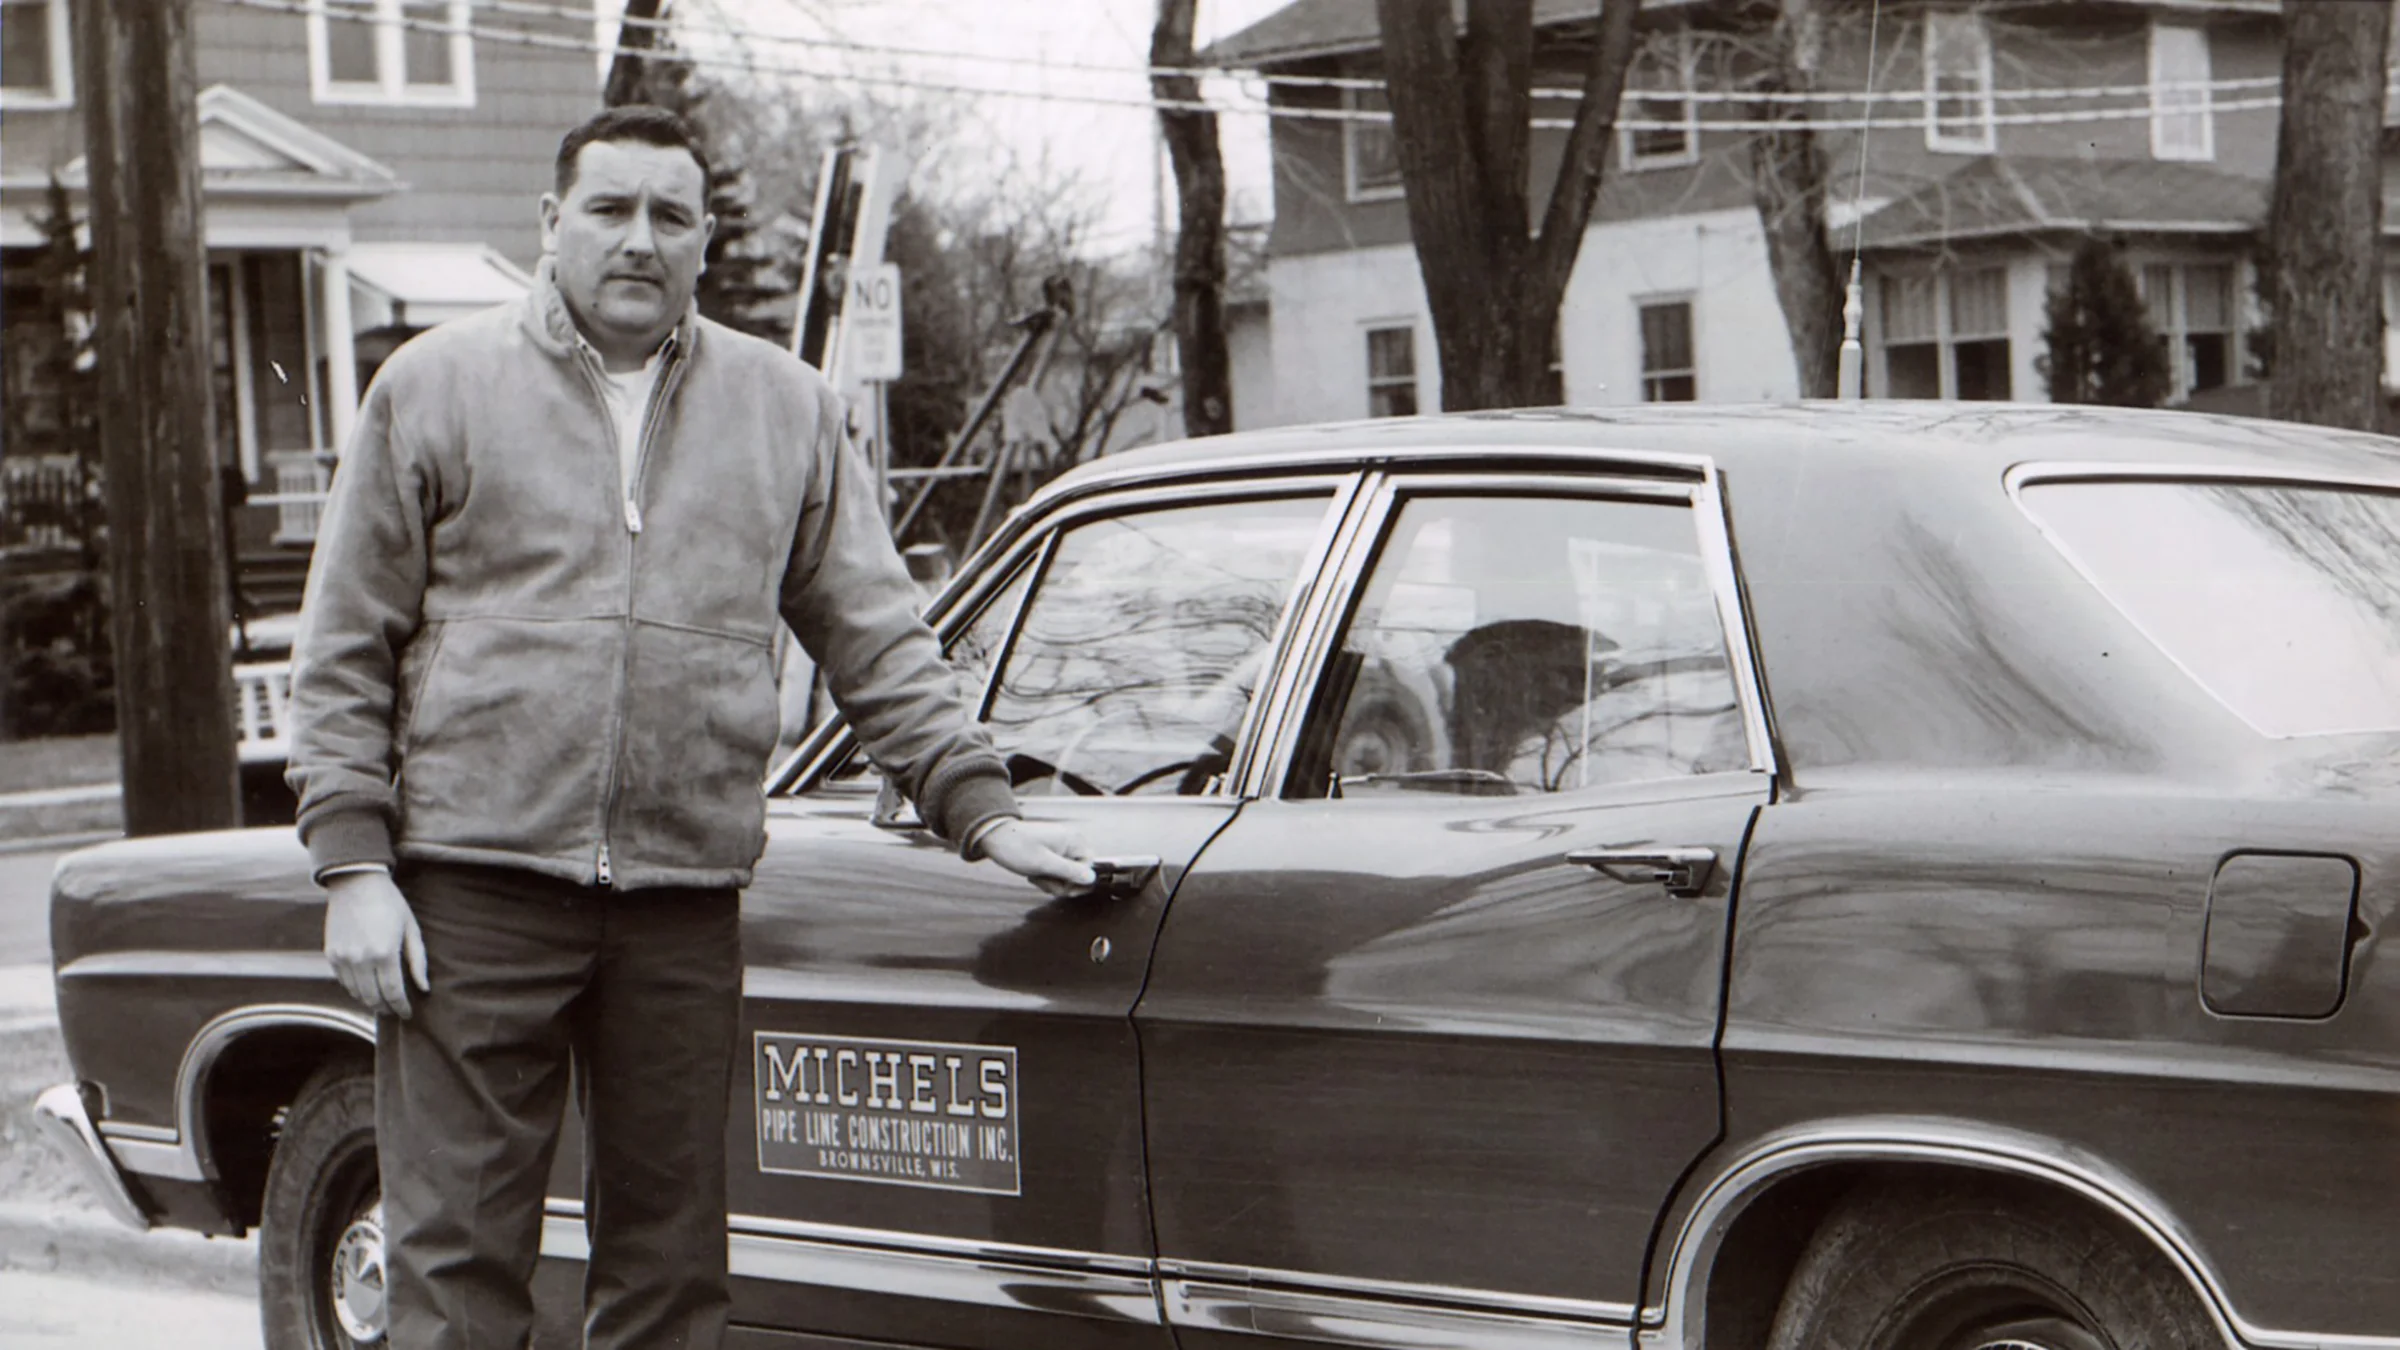 Dale Michels stands next to a car in an archival photo